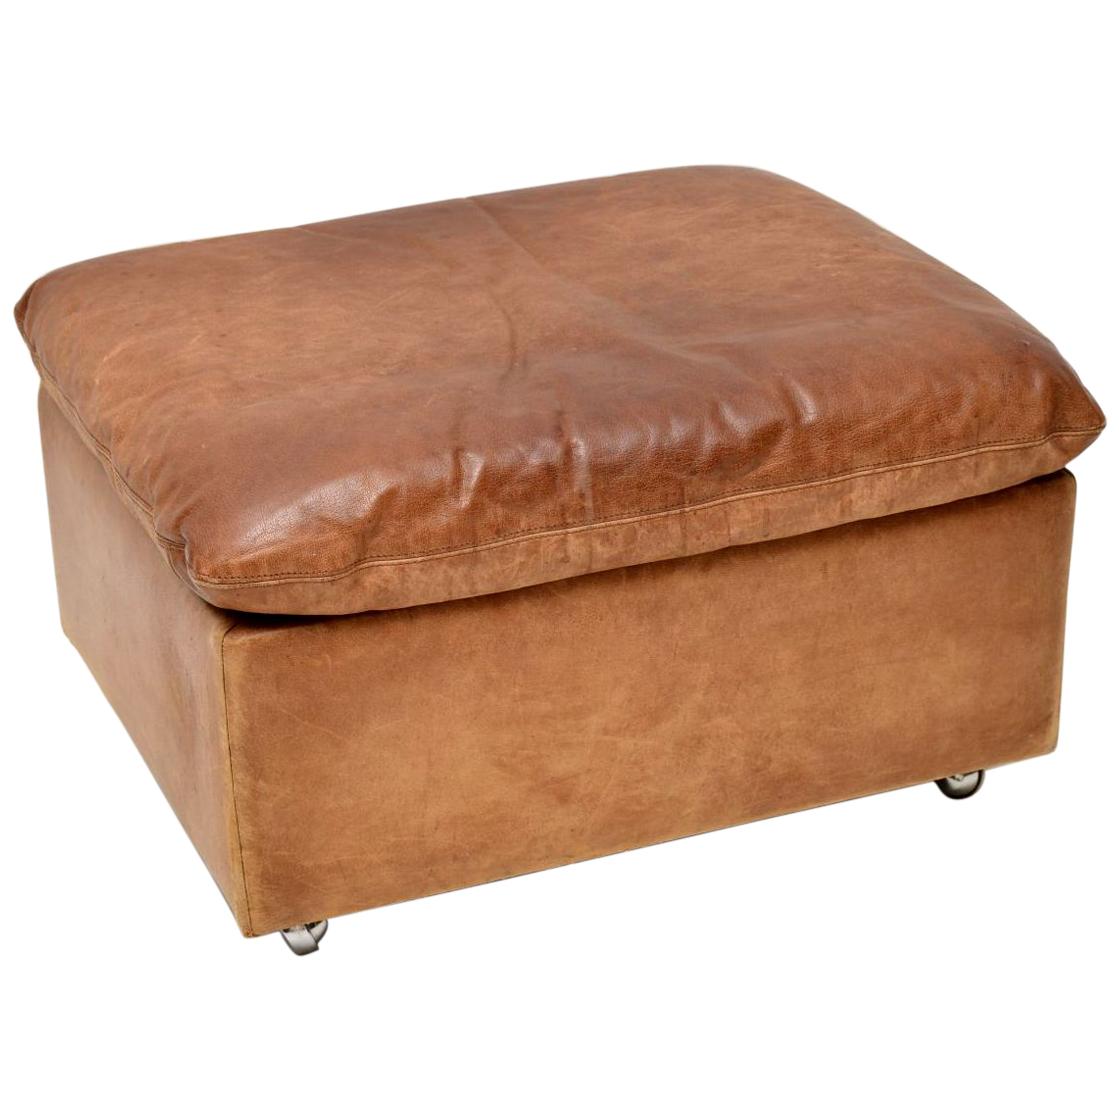 1960s Vintage Tanned Leather and Chrome Footstool Ottoman